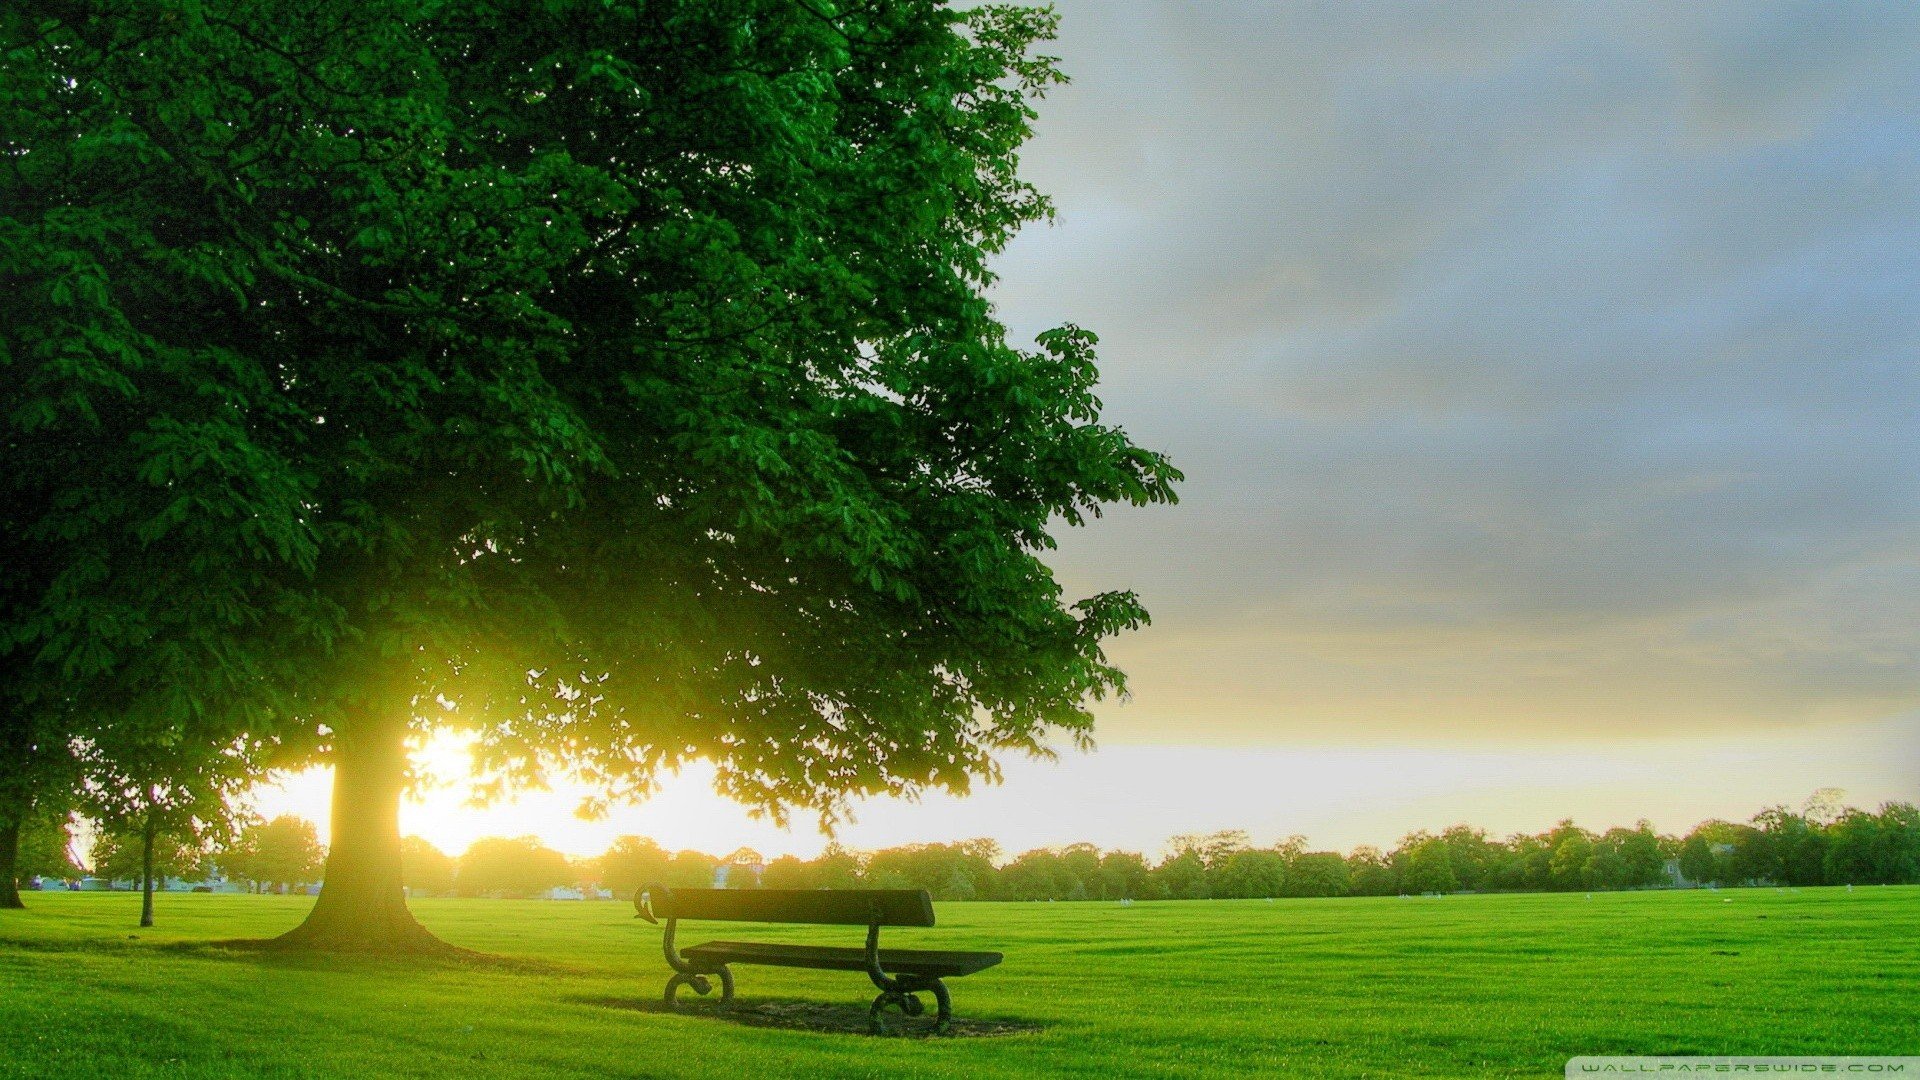 sunrise, Landscapes, Nature, Trees, Forests, Grass, Summer, Bench, Virtual Wallpaper